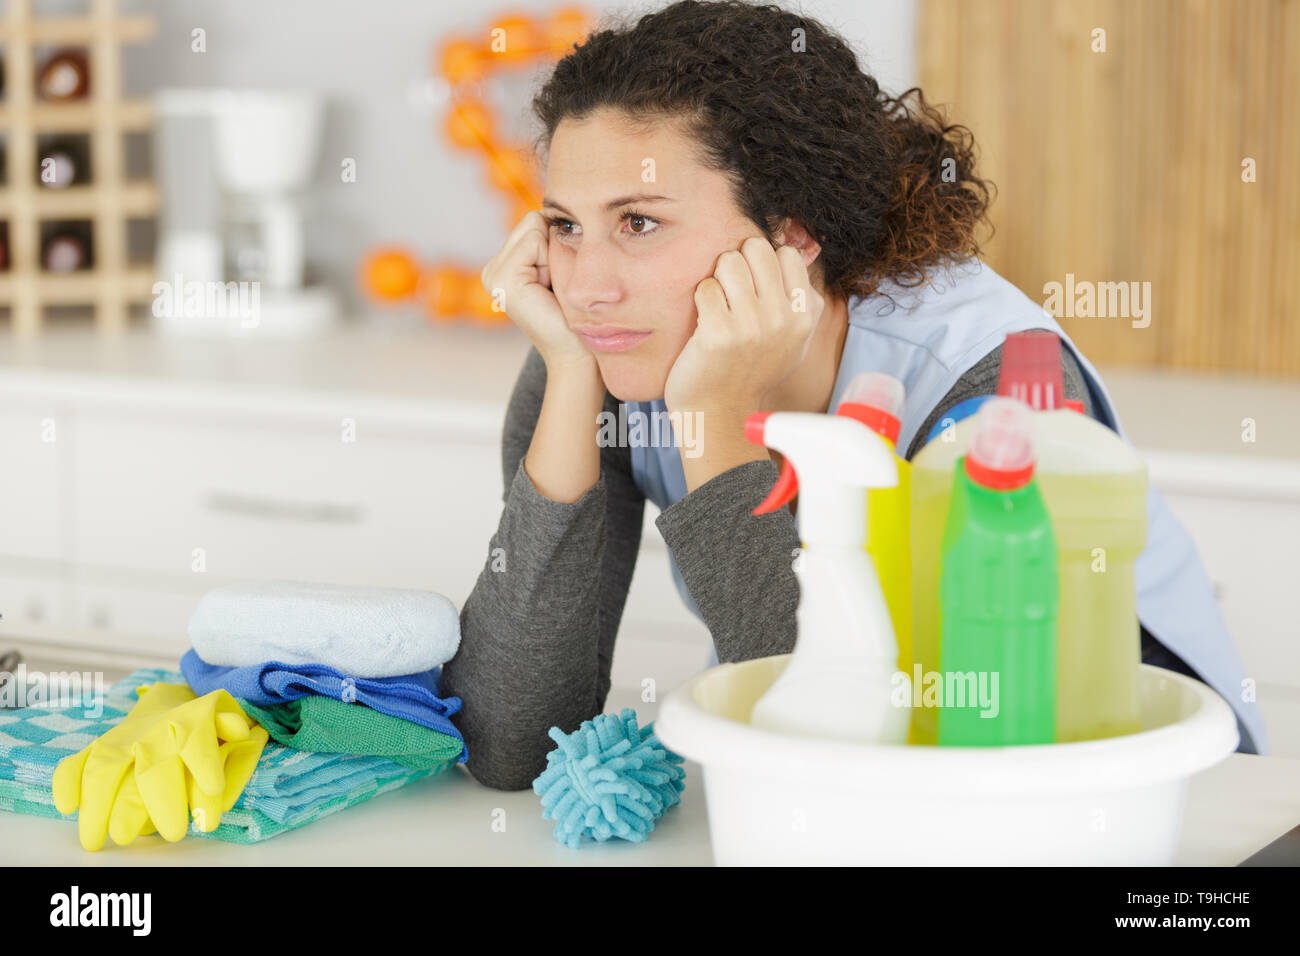 woman boring with cleaning products Stock Photo